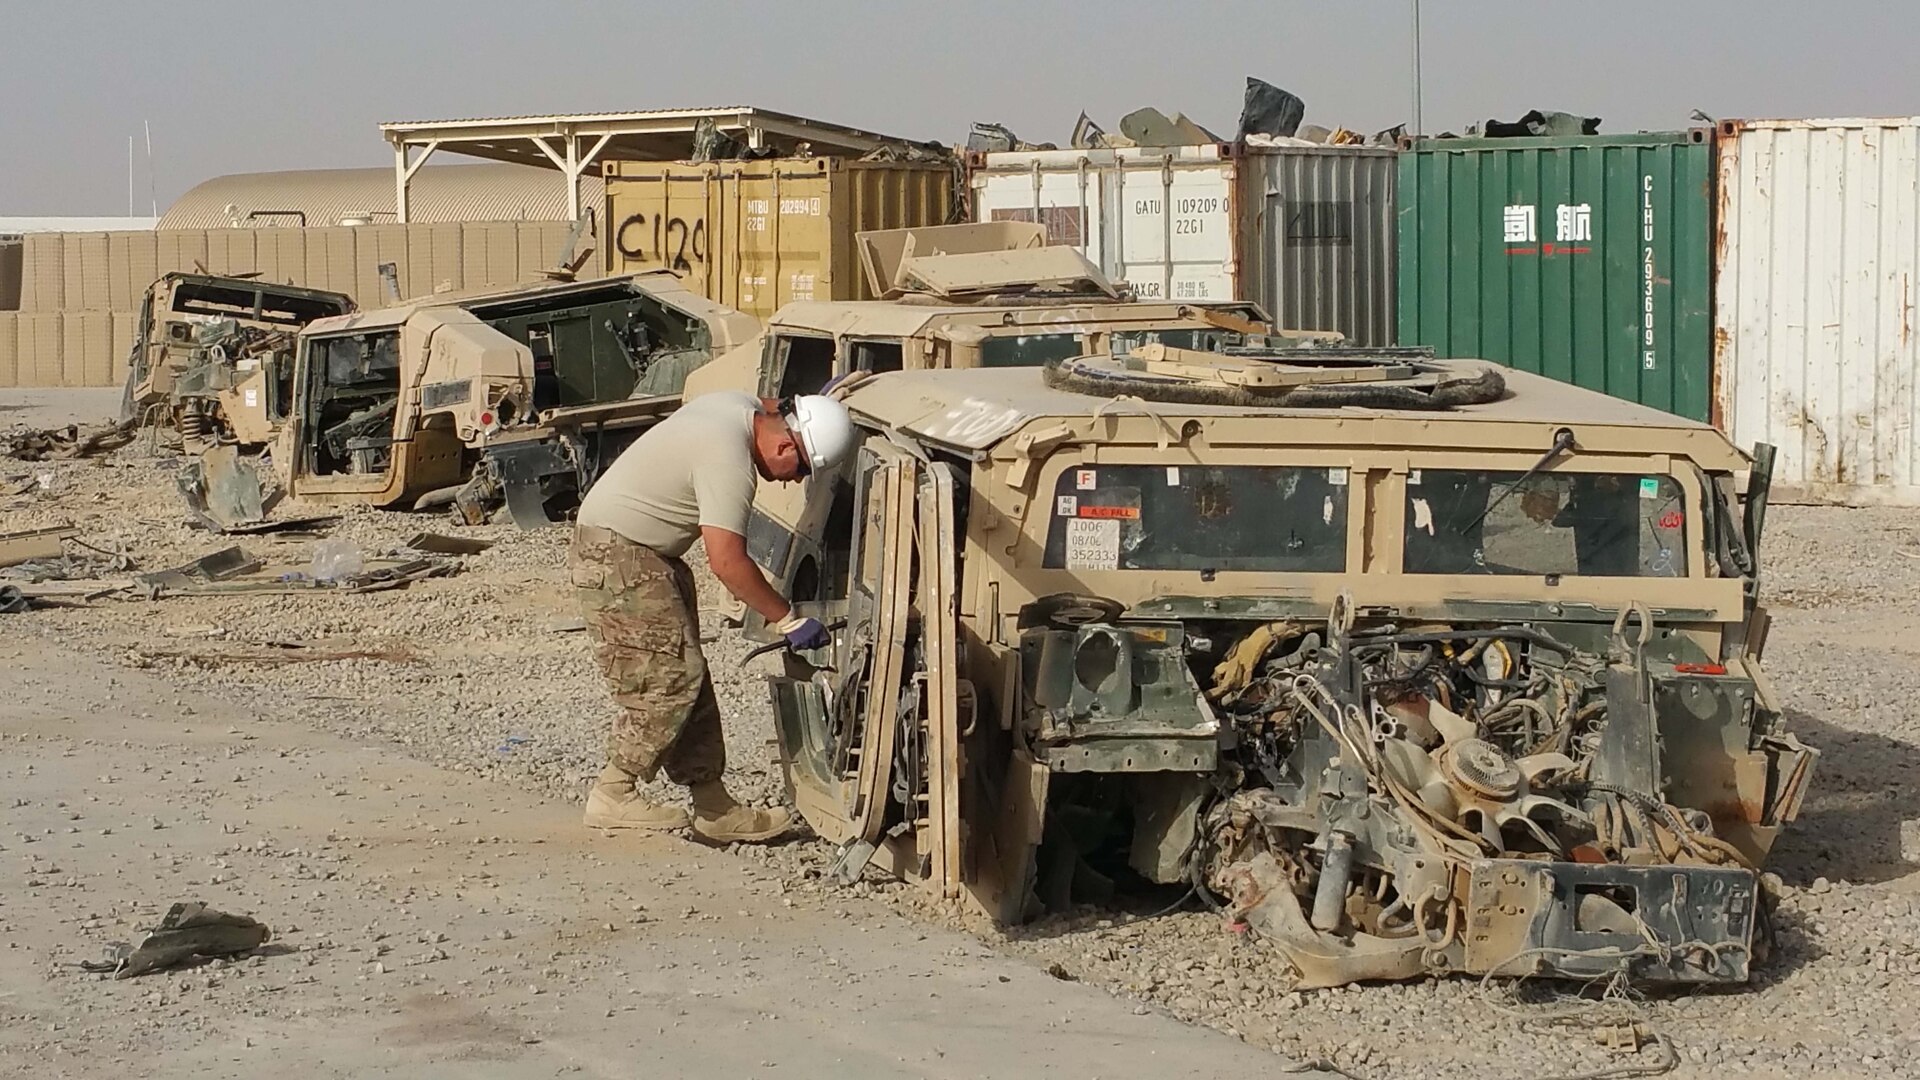 A Humvee and servicemember in Afghanistan